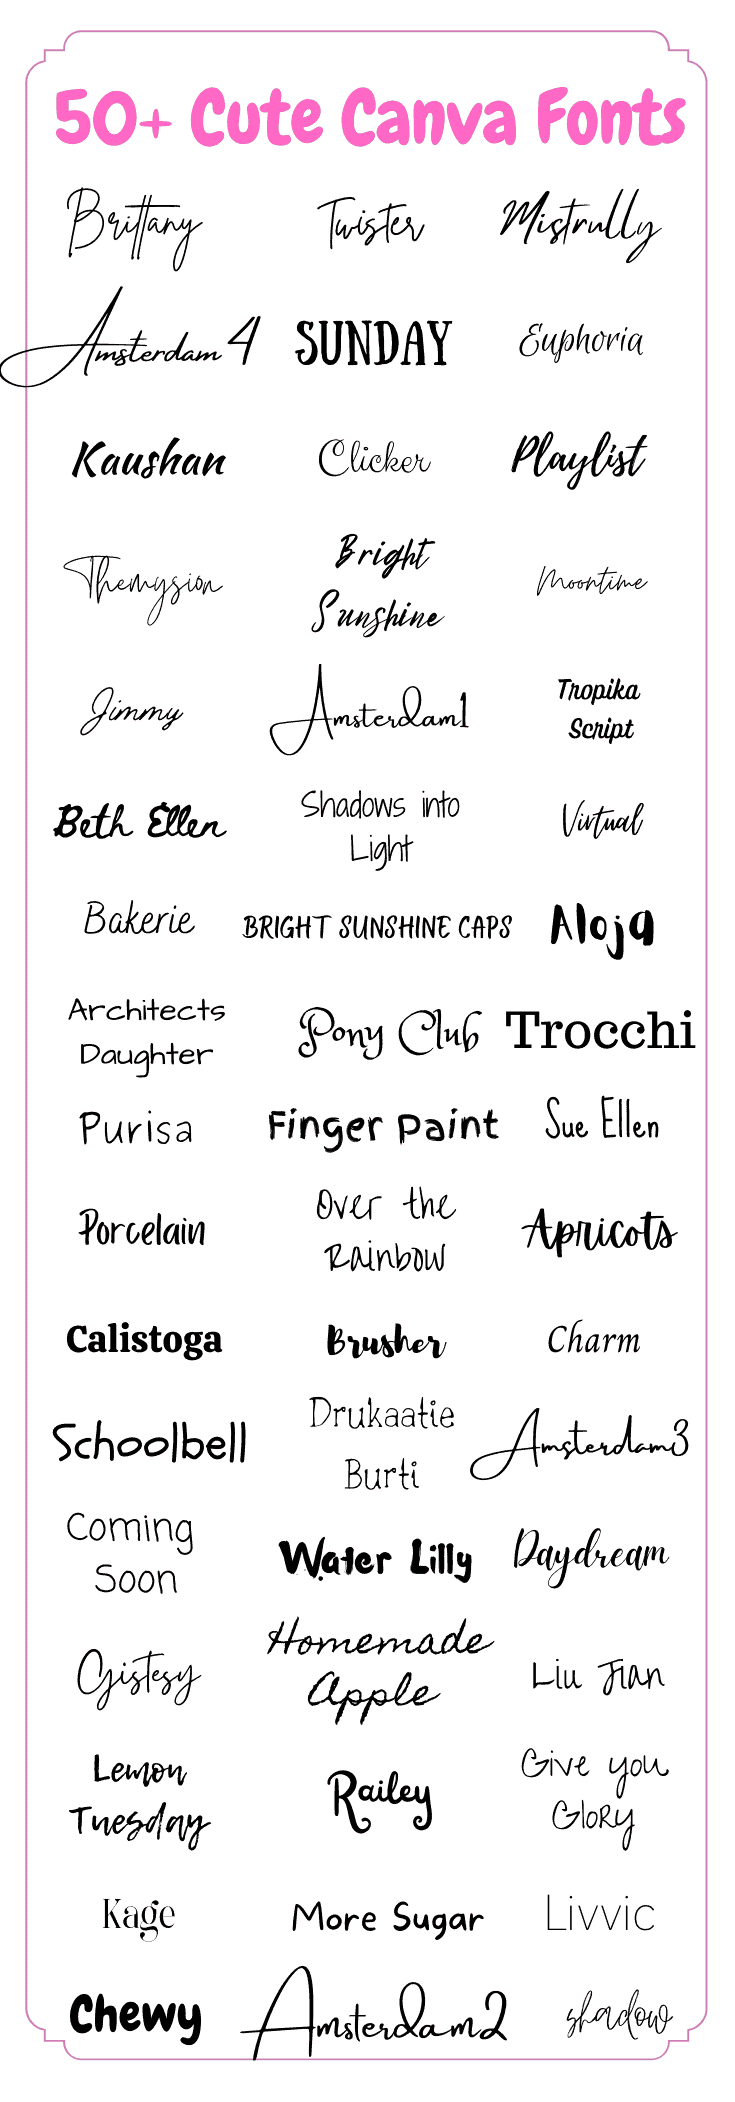 find comparable free font